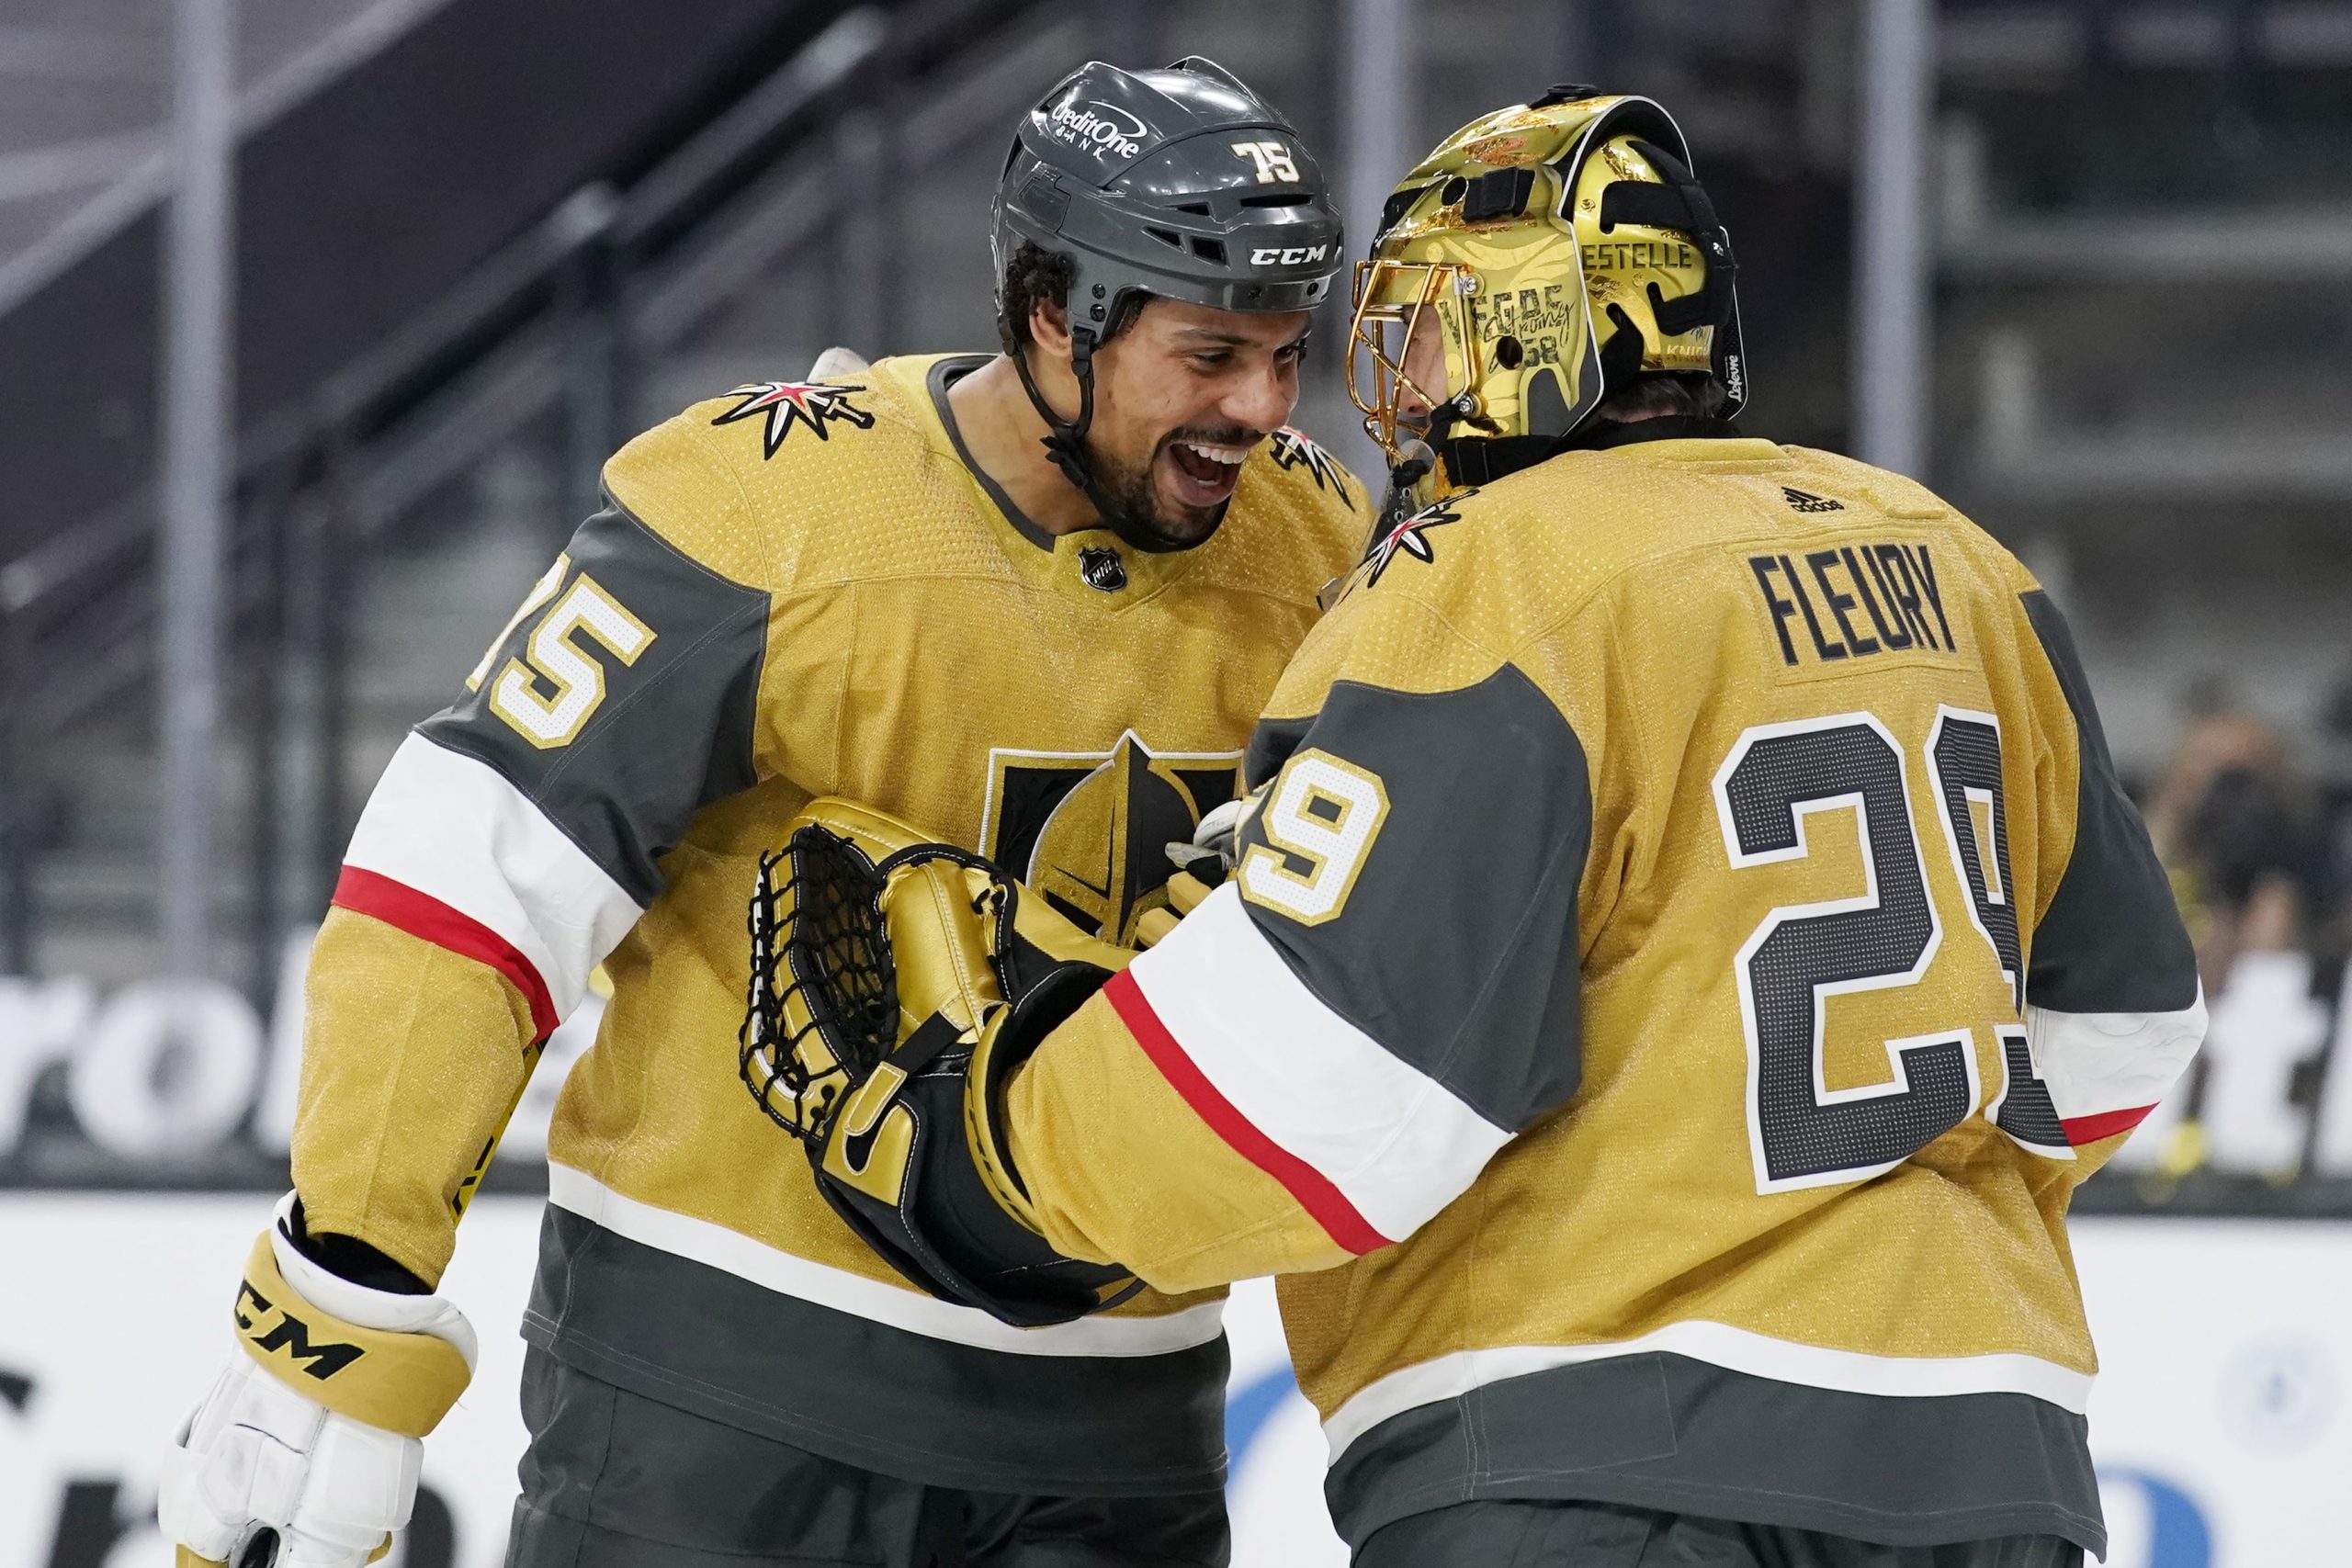 Vegas Golden Knights goaltender Marc-Andre Fleury celebrates after a goal by right wing Ryan Reaves